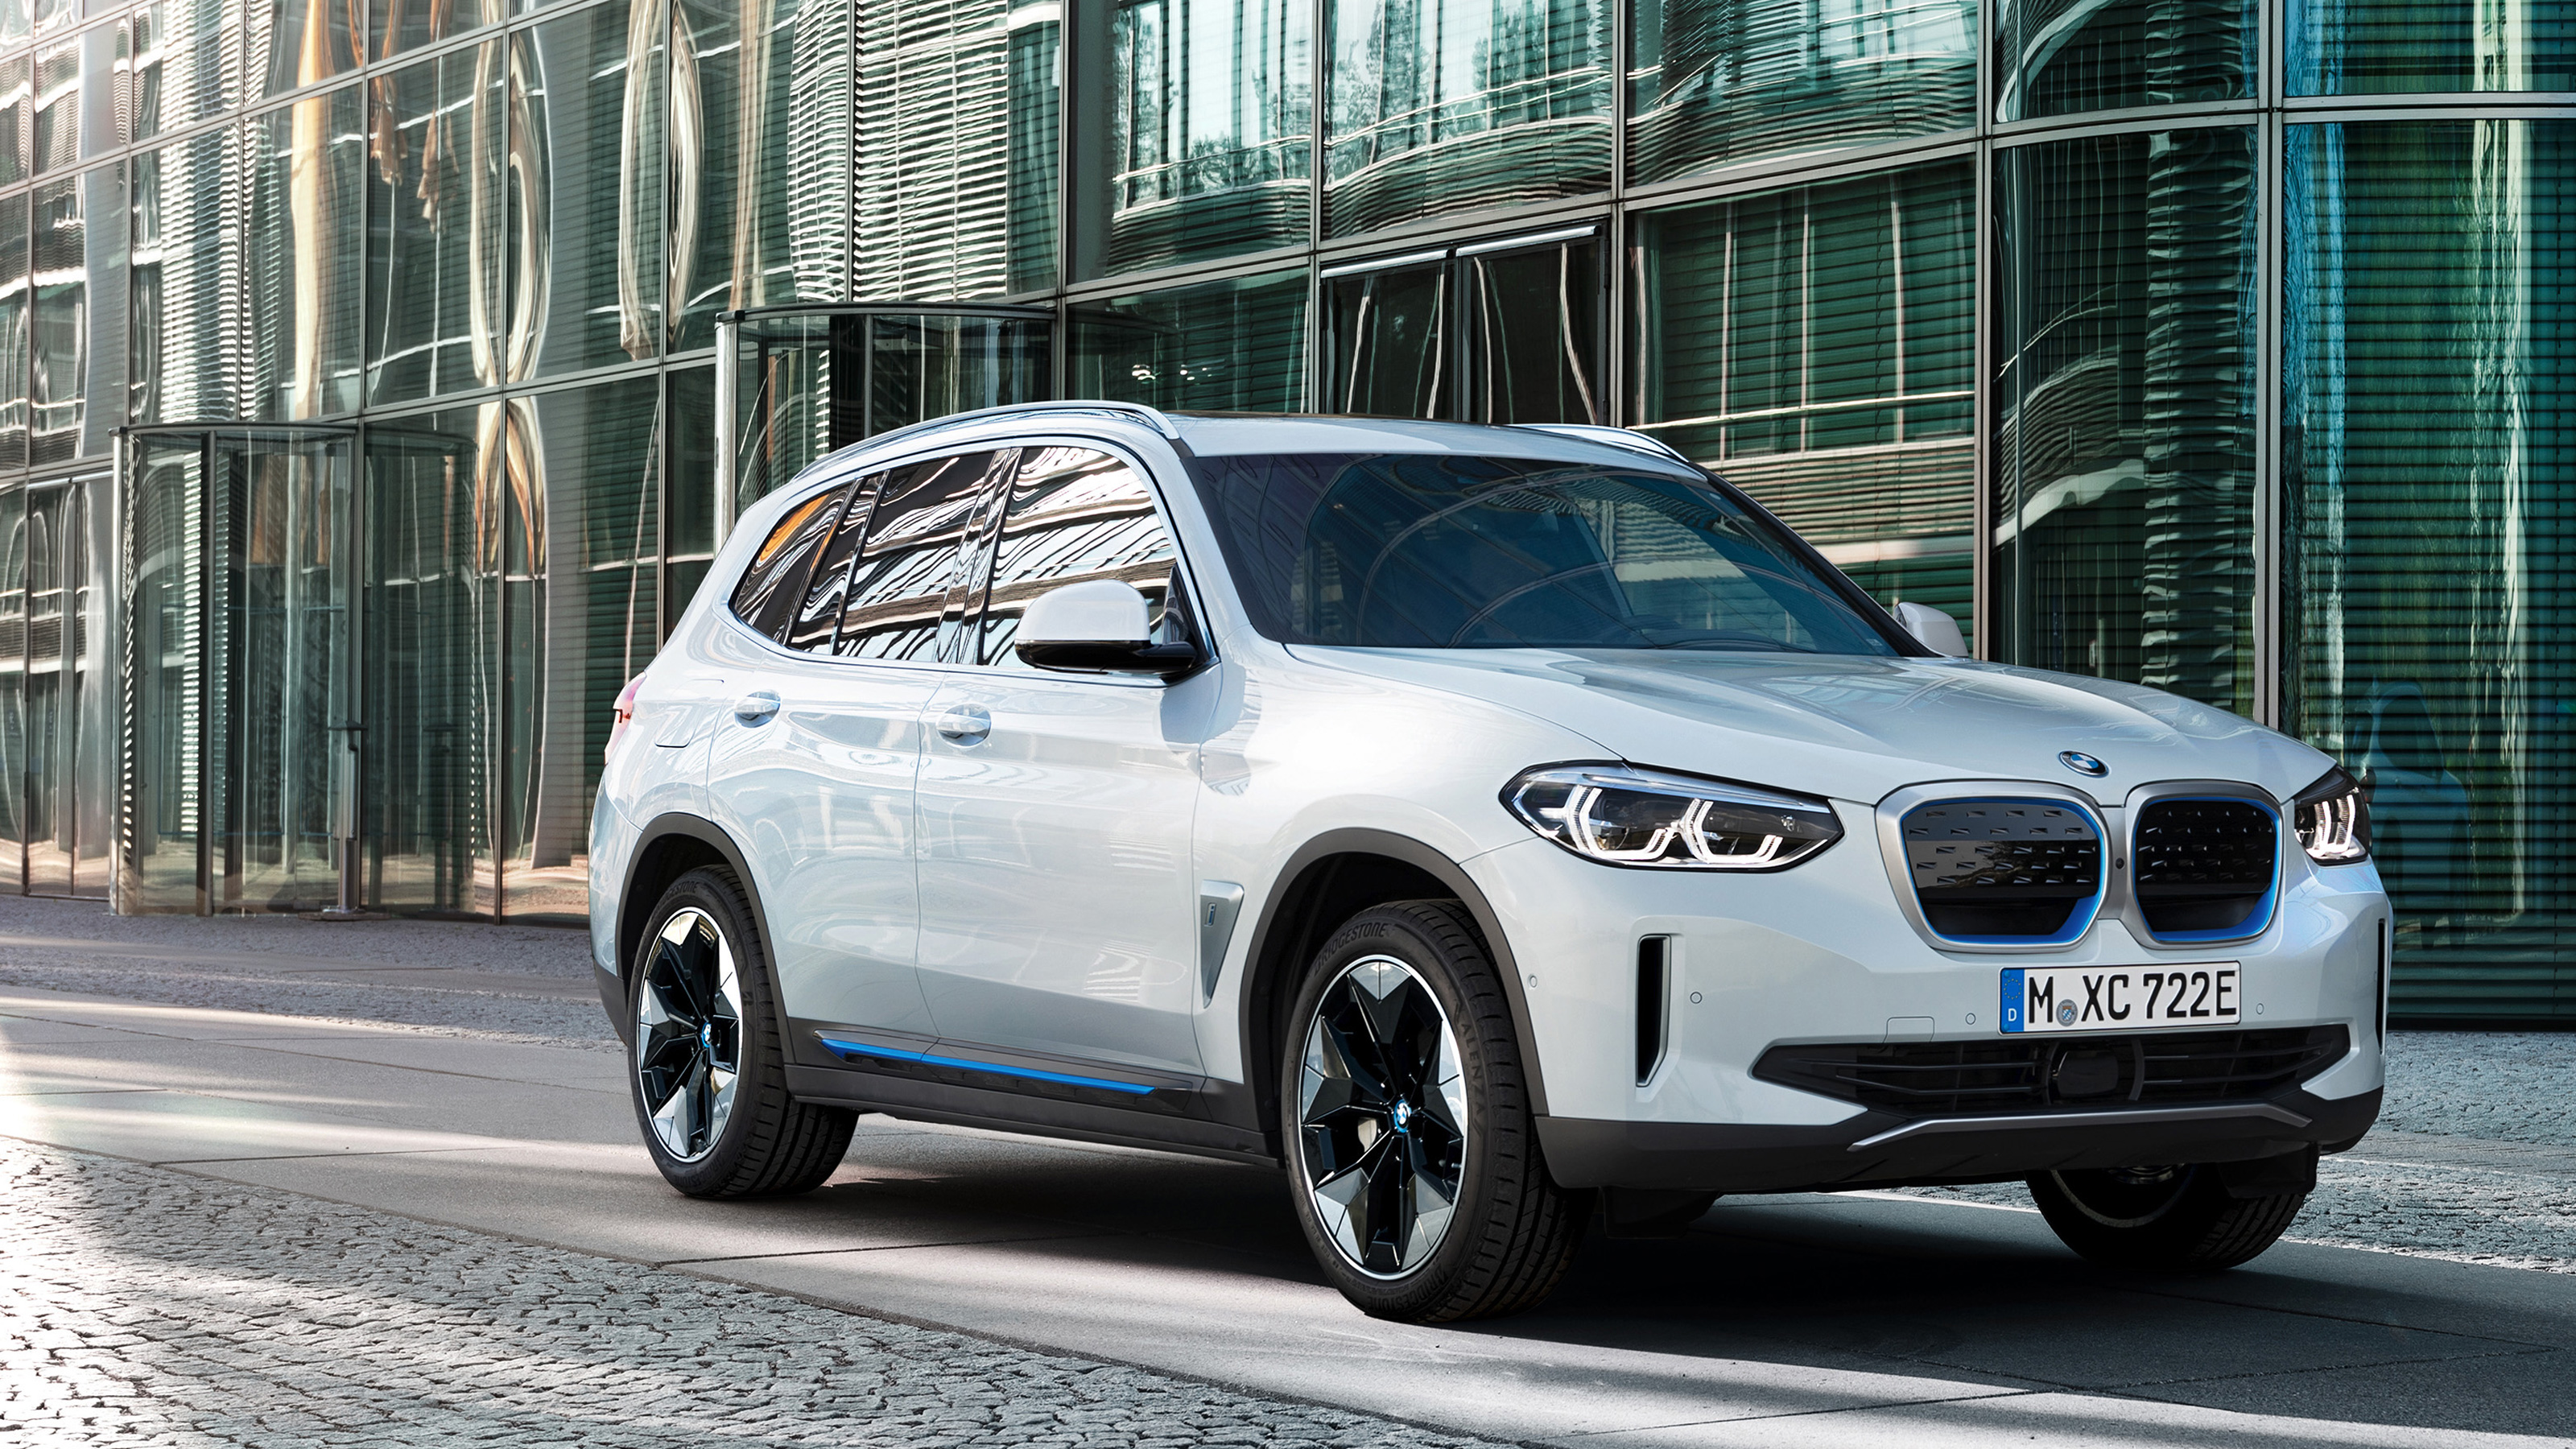 New 2021 BMW iX3 electric car on sale in the UK from £61,900 Auto Express